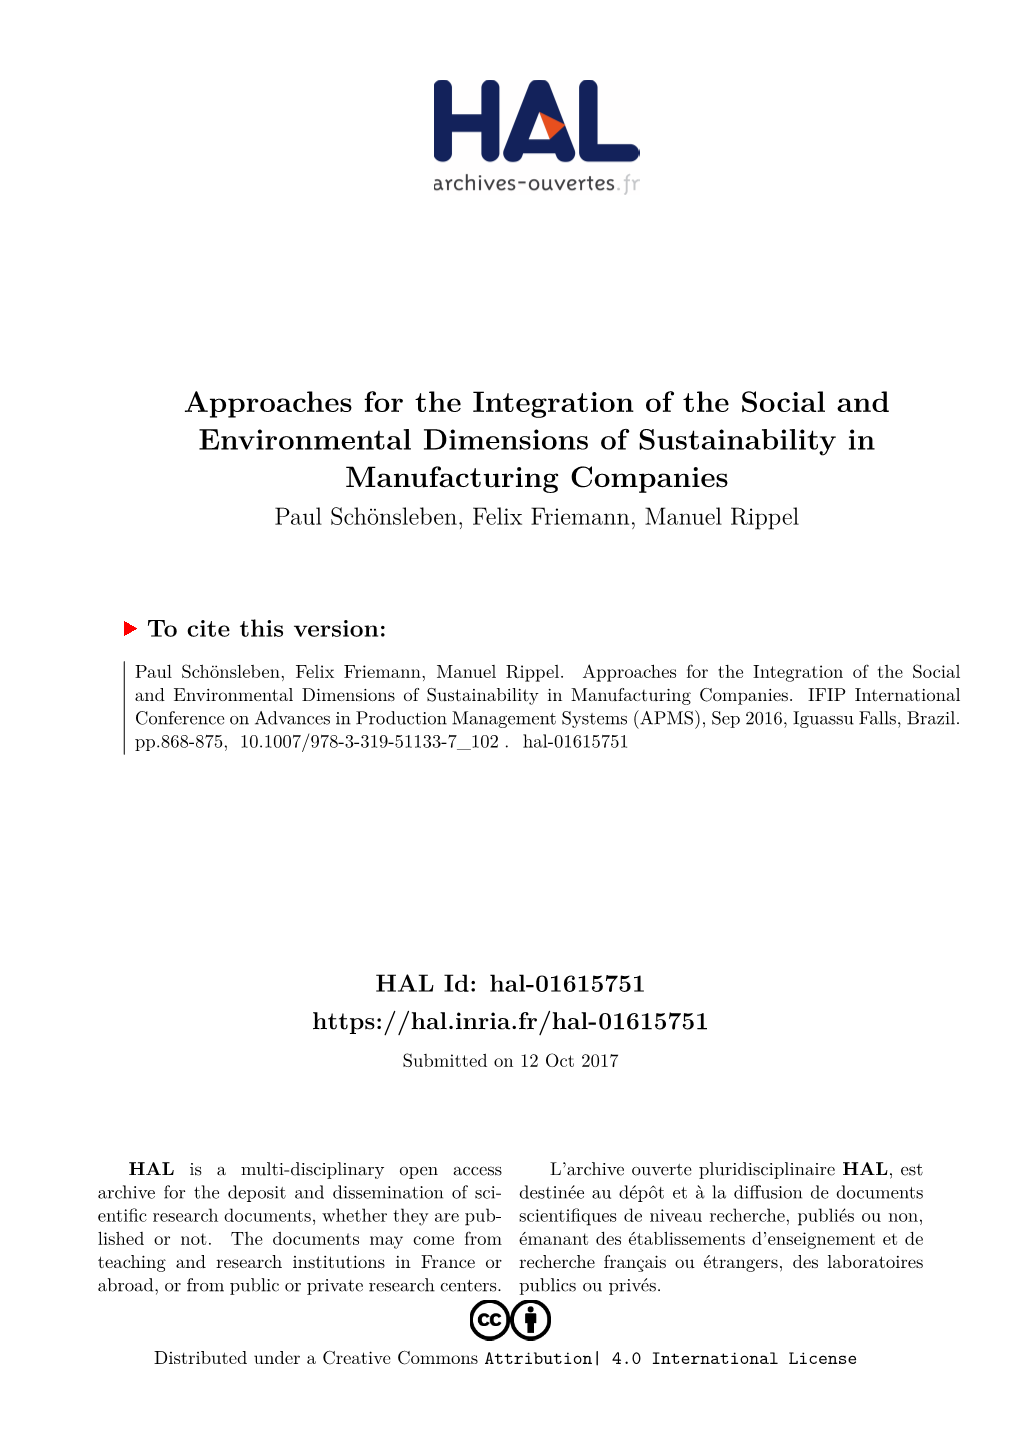 Approaches for the Integration of the Social and Environmental Dimensions of Sustainability in Manufacturing Companies Paul Schönsleben, Felix Friemann, Manuel Rippel